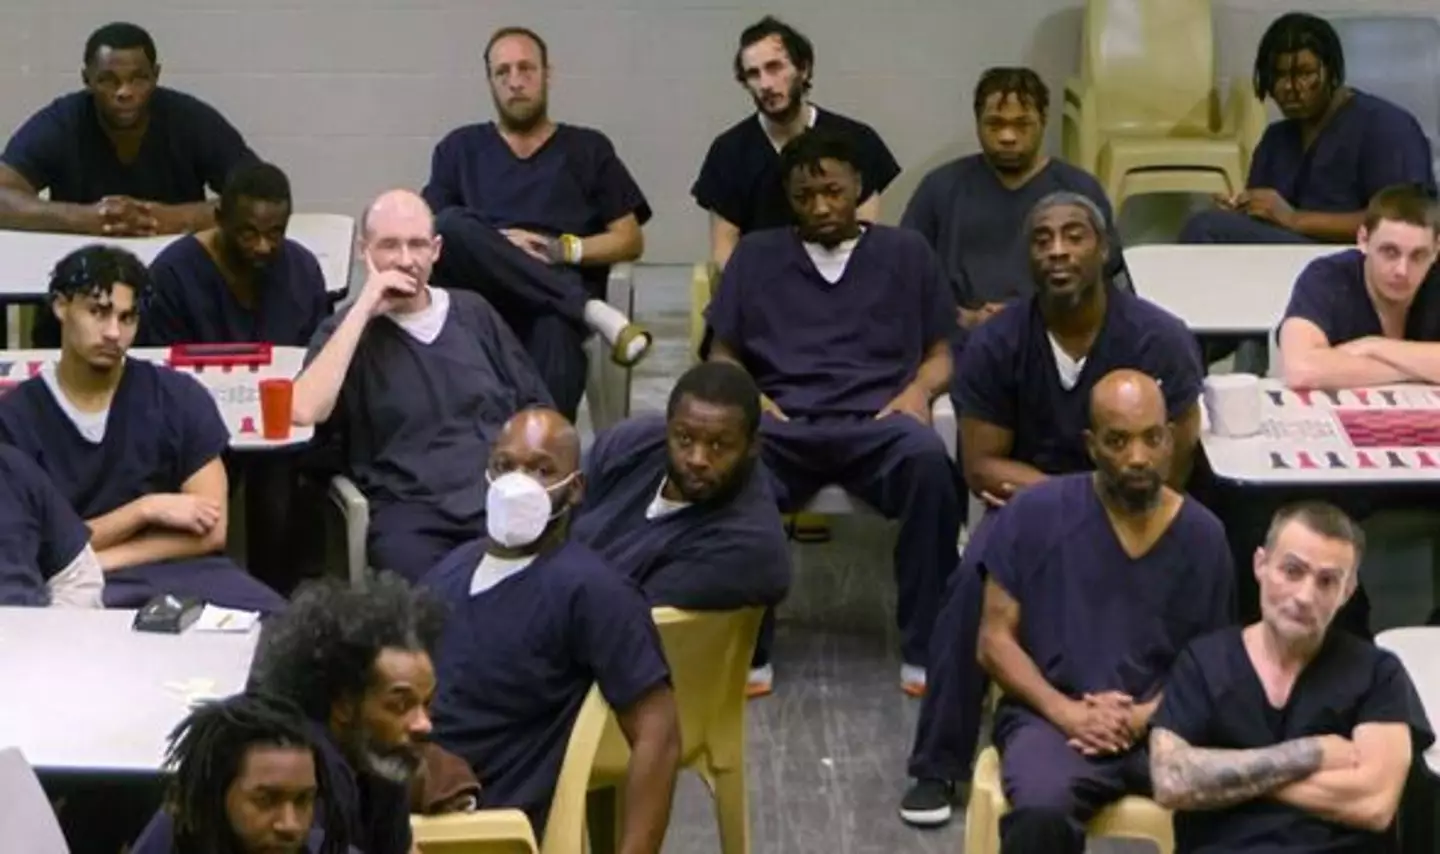 Netflix viewers are impressed with Unlocked: A Jail Experiment.